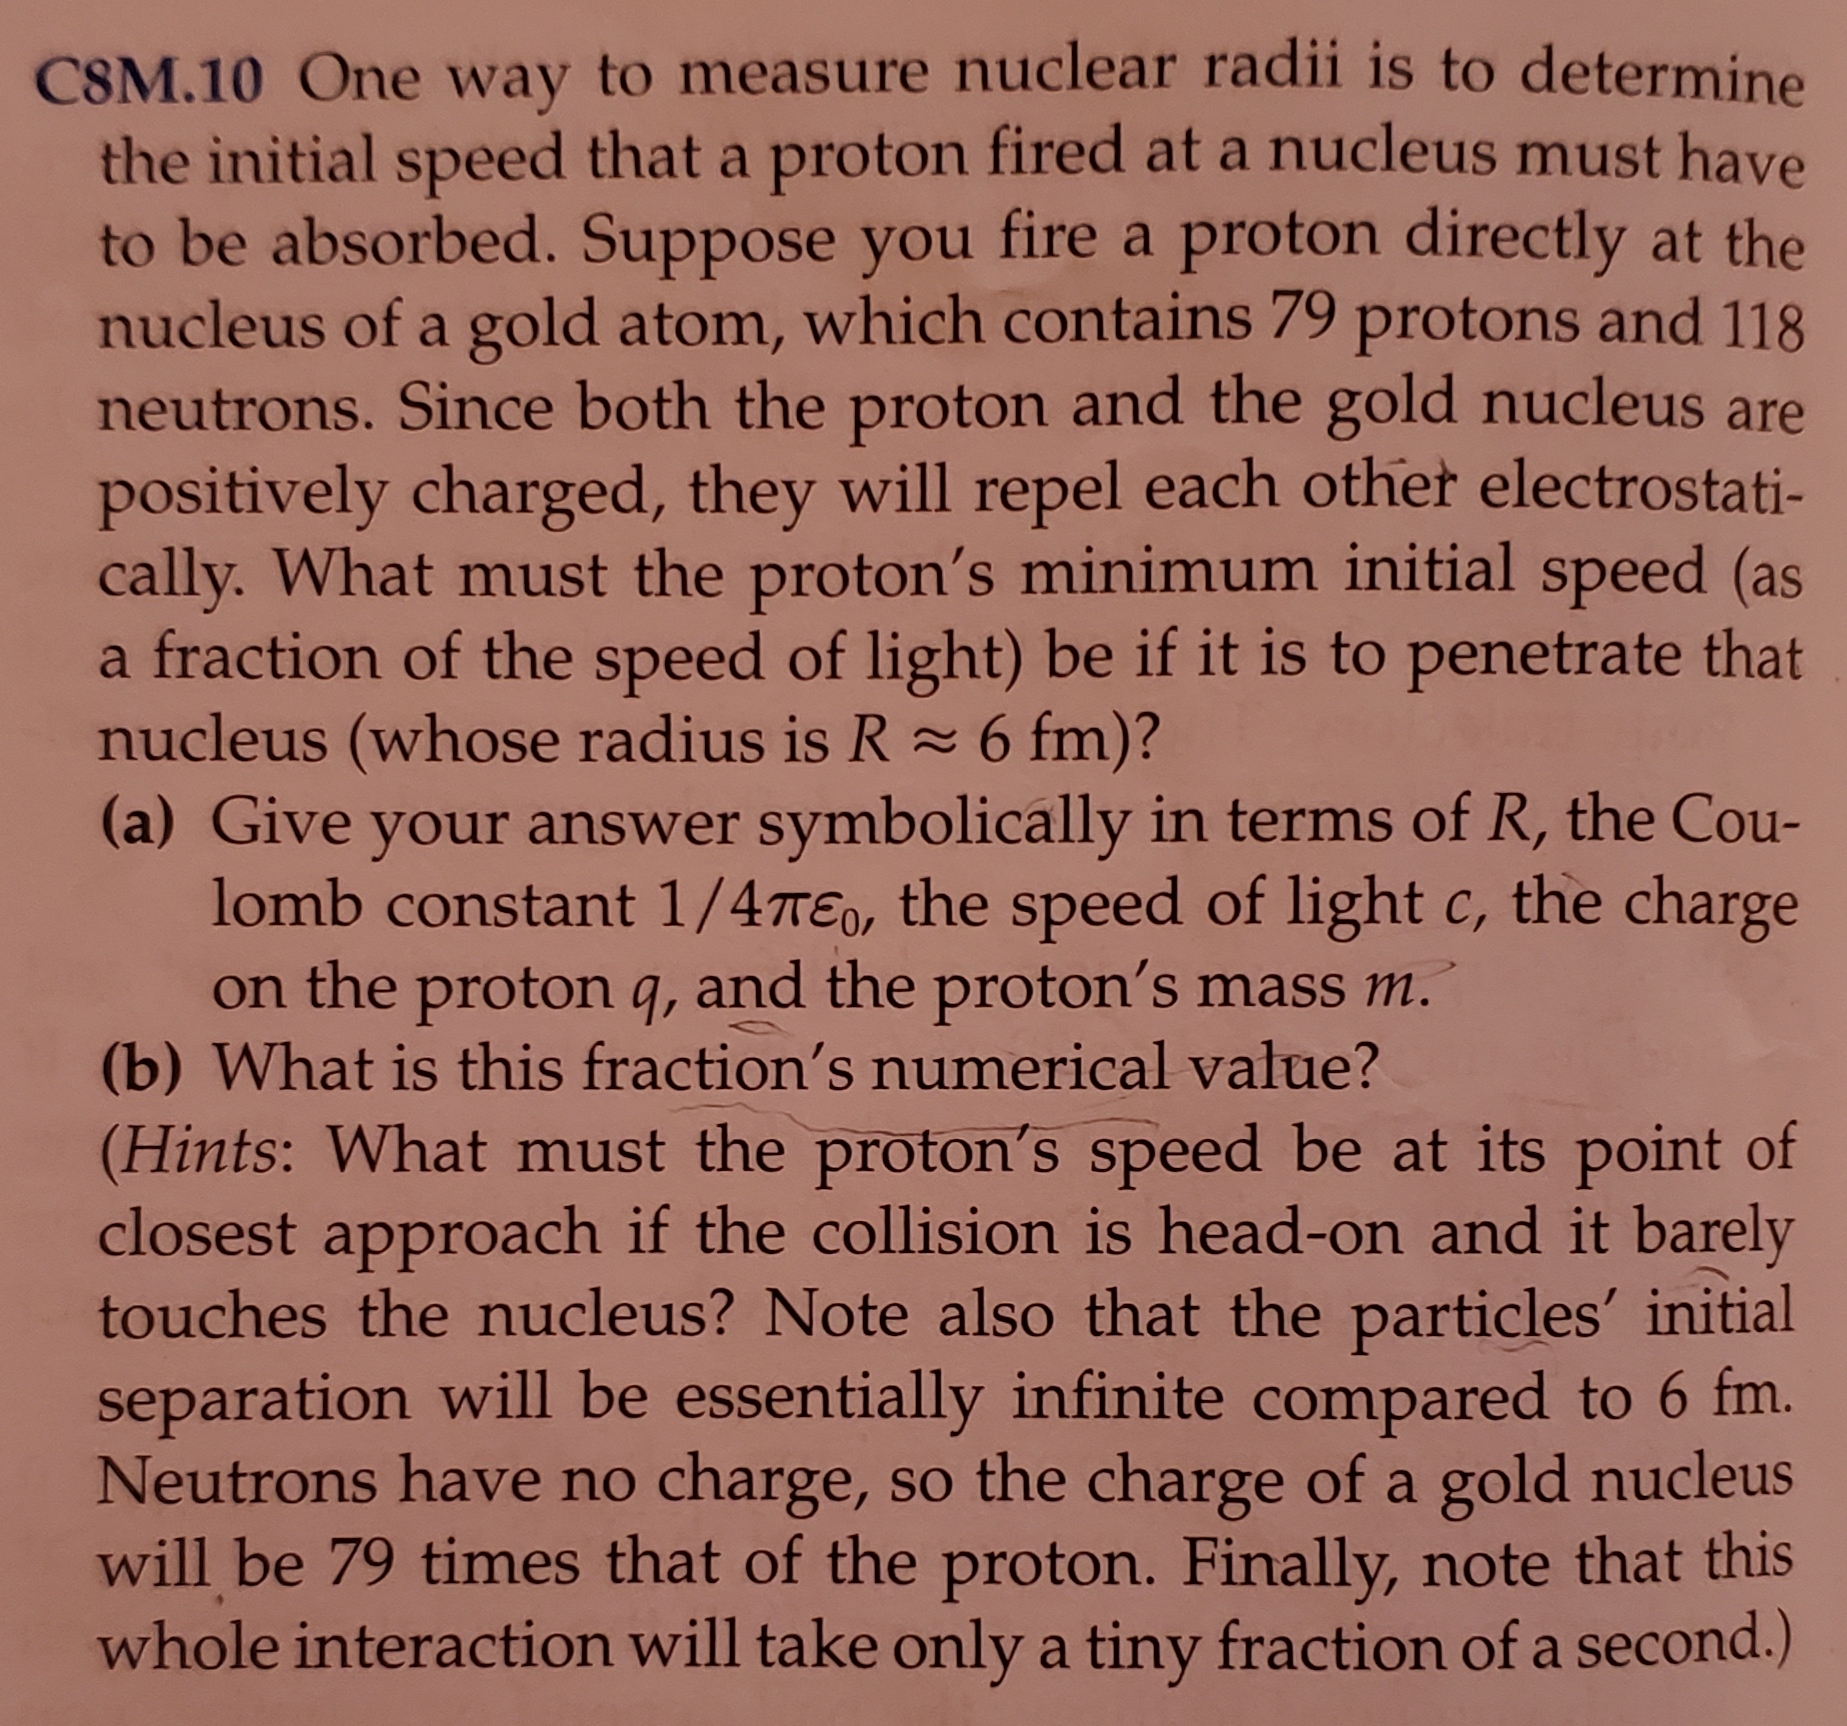 CSM.10 One way to measure nuclear radii is to determine
the initial speed that a proton fired at a nucleus must have
to be absorbed. Suppose you fire a proton directly at the
nucleus of a gold atom, which contains 79 protons and
neutrons. Since both the proton and the gold nucleus are
positively charged, they will repel each other electrostati
cally. What must the proton's minimum initial speed (as
a fraction of the speed of light) be if it is to penetrate that
nucleus (whose radius is R 6 fm)?
(a) Give your answer symbolically in terms of R, the Cou-
lomb constant 1/4TEo, the speed of light c, the charge
on the proton q, and the proton's mass m.
(b) What is this fraction's numerical value?
(Hints: What must the proton's speed be at its point of
closest approach if the collision is head-on and it barely
touches the nucleus? Note also that the particles' initial
separation will be essentially infinite compared to 6 fm.
Neutrons have no
charge, so the charge of a gold nucleus
will be 79 times that of the proton. Finally, note that this
whole interaction will take only a tiny fraction of a second.)
